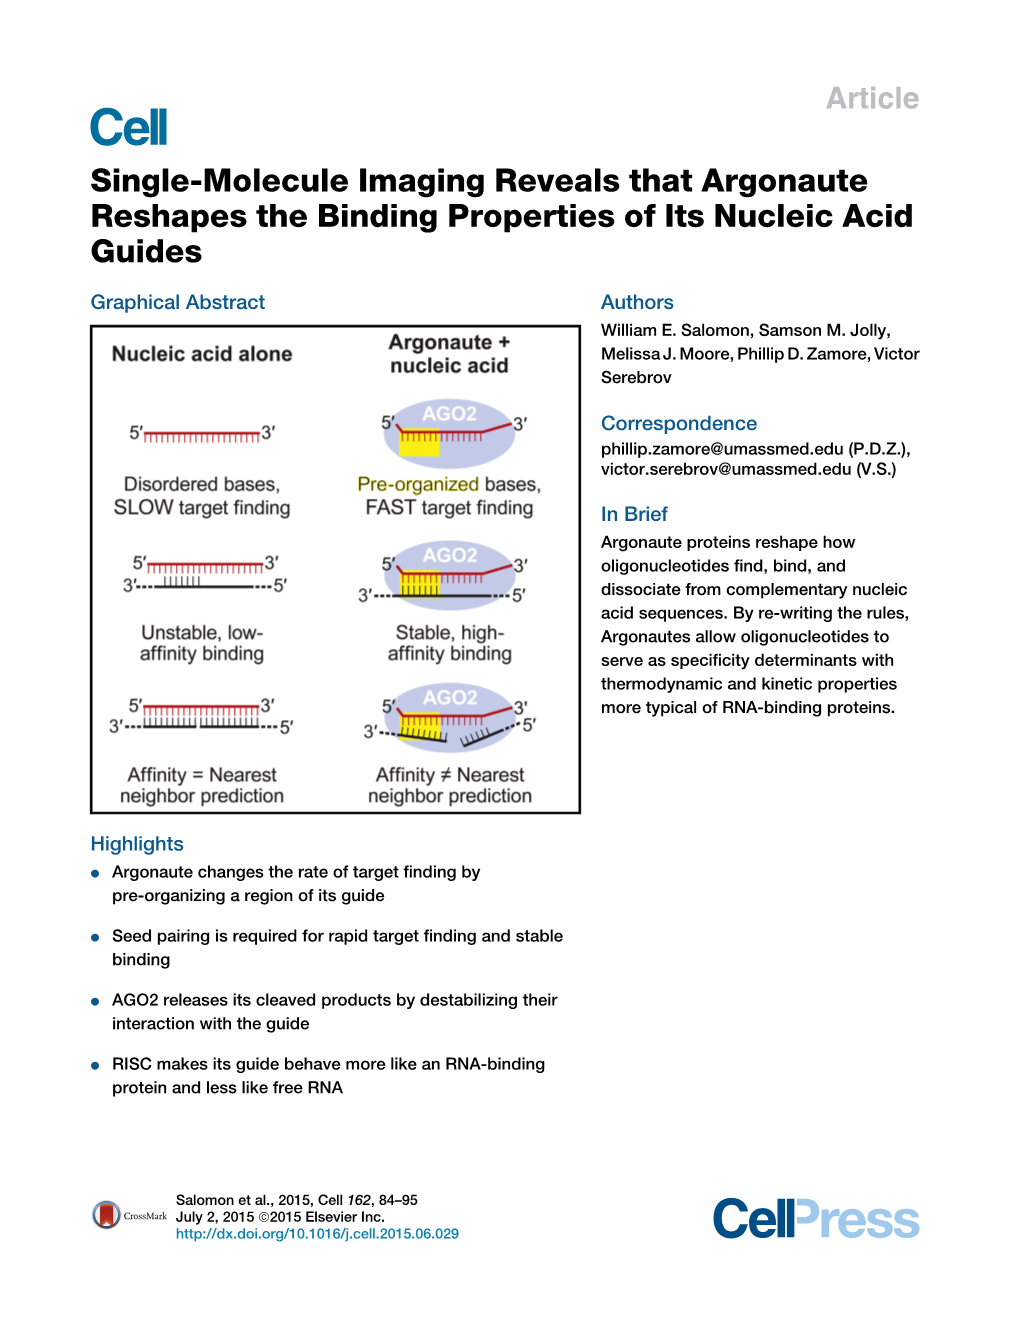 Single-Molecule Imaging Reveals That Argonaute Reshapes the Binding Properties of Its Nucleic Acid Guides